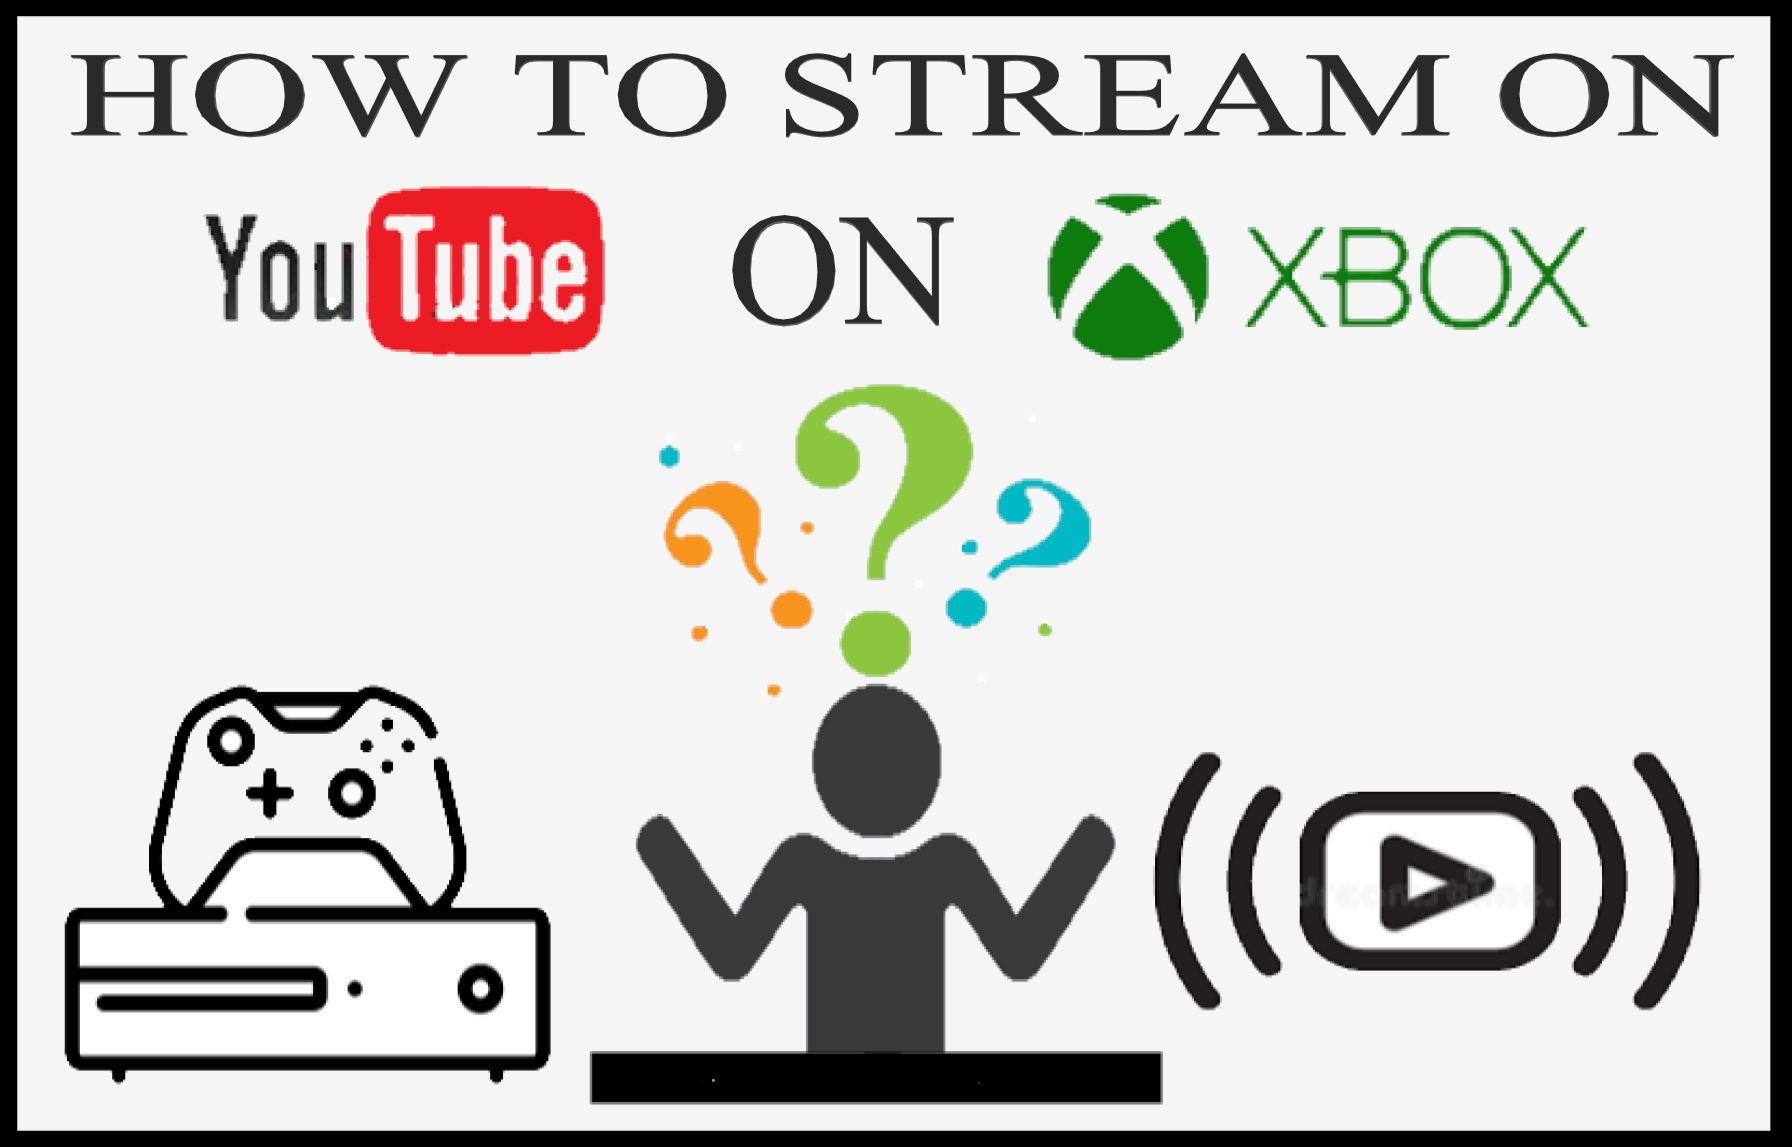 Step by step guide to find how to stream on Youtube on Xbox